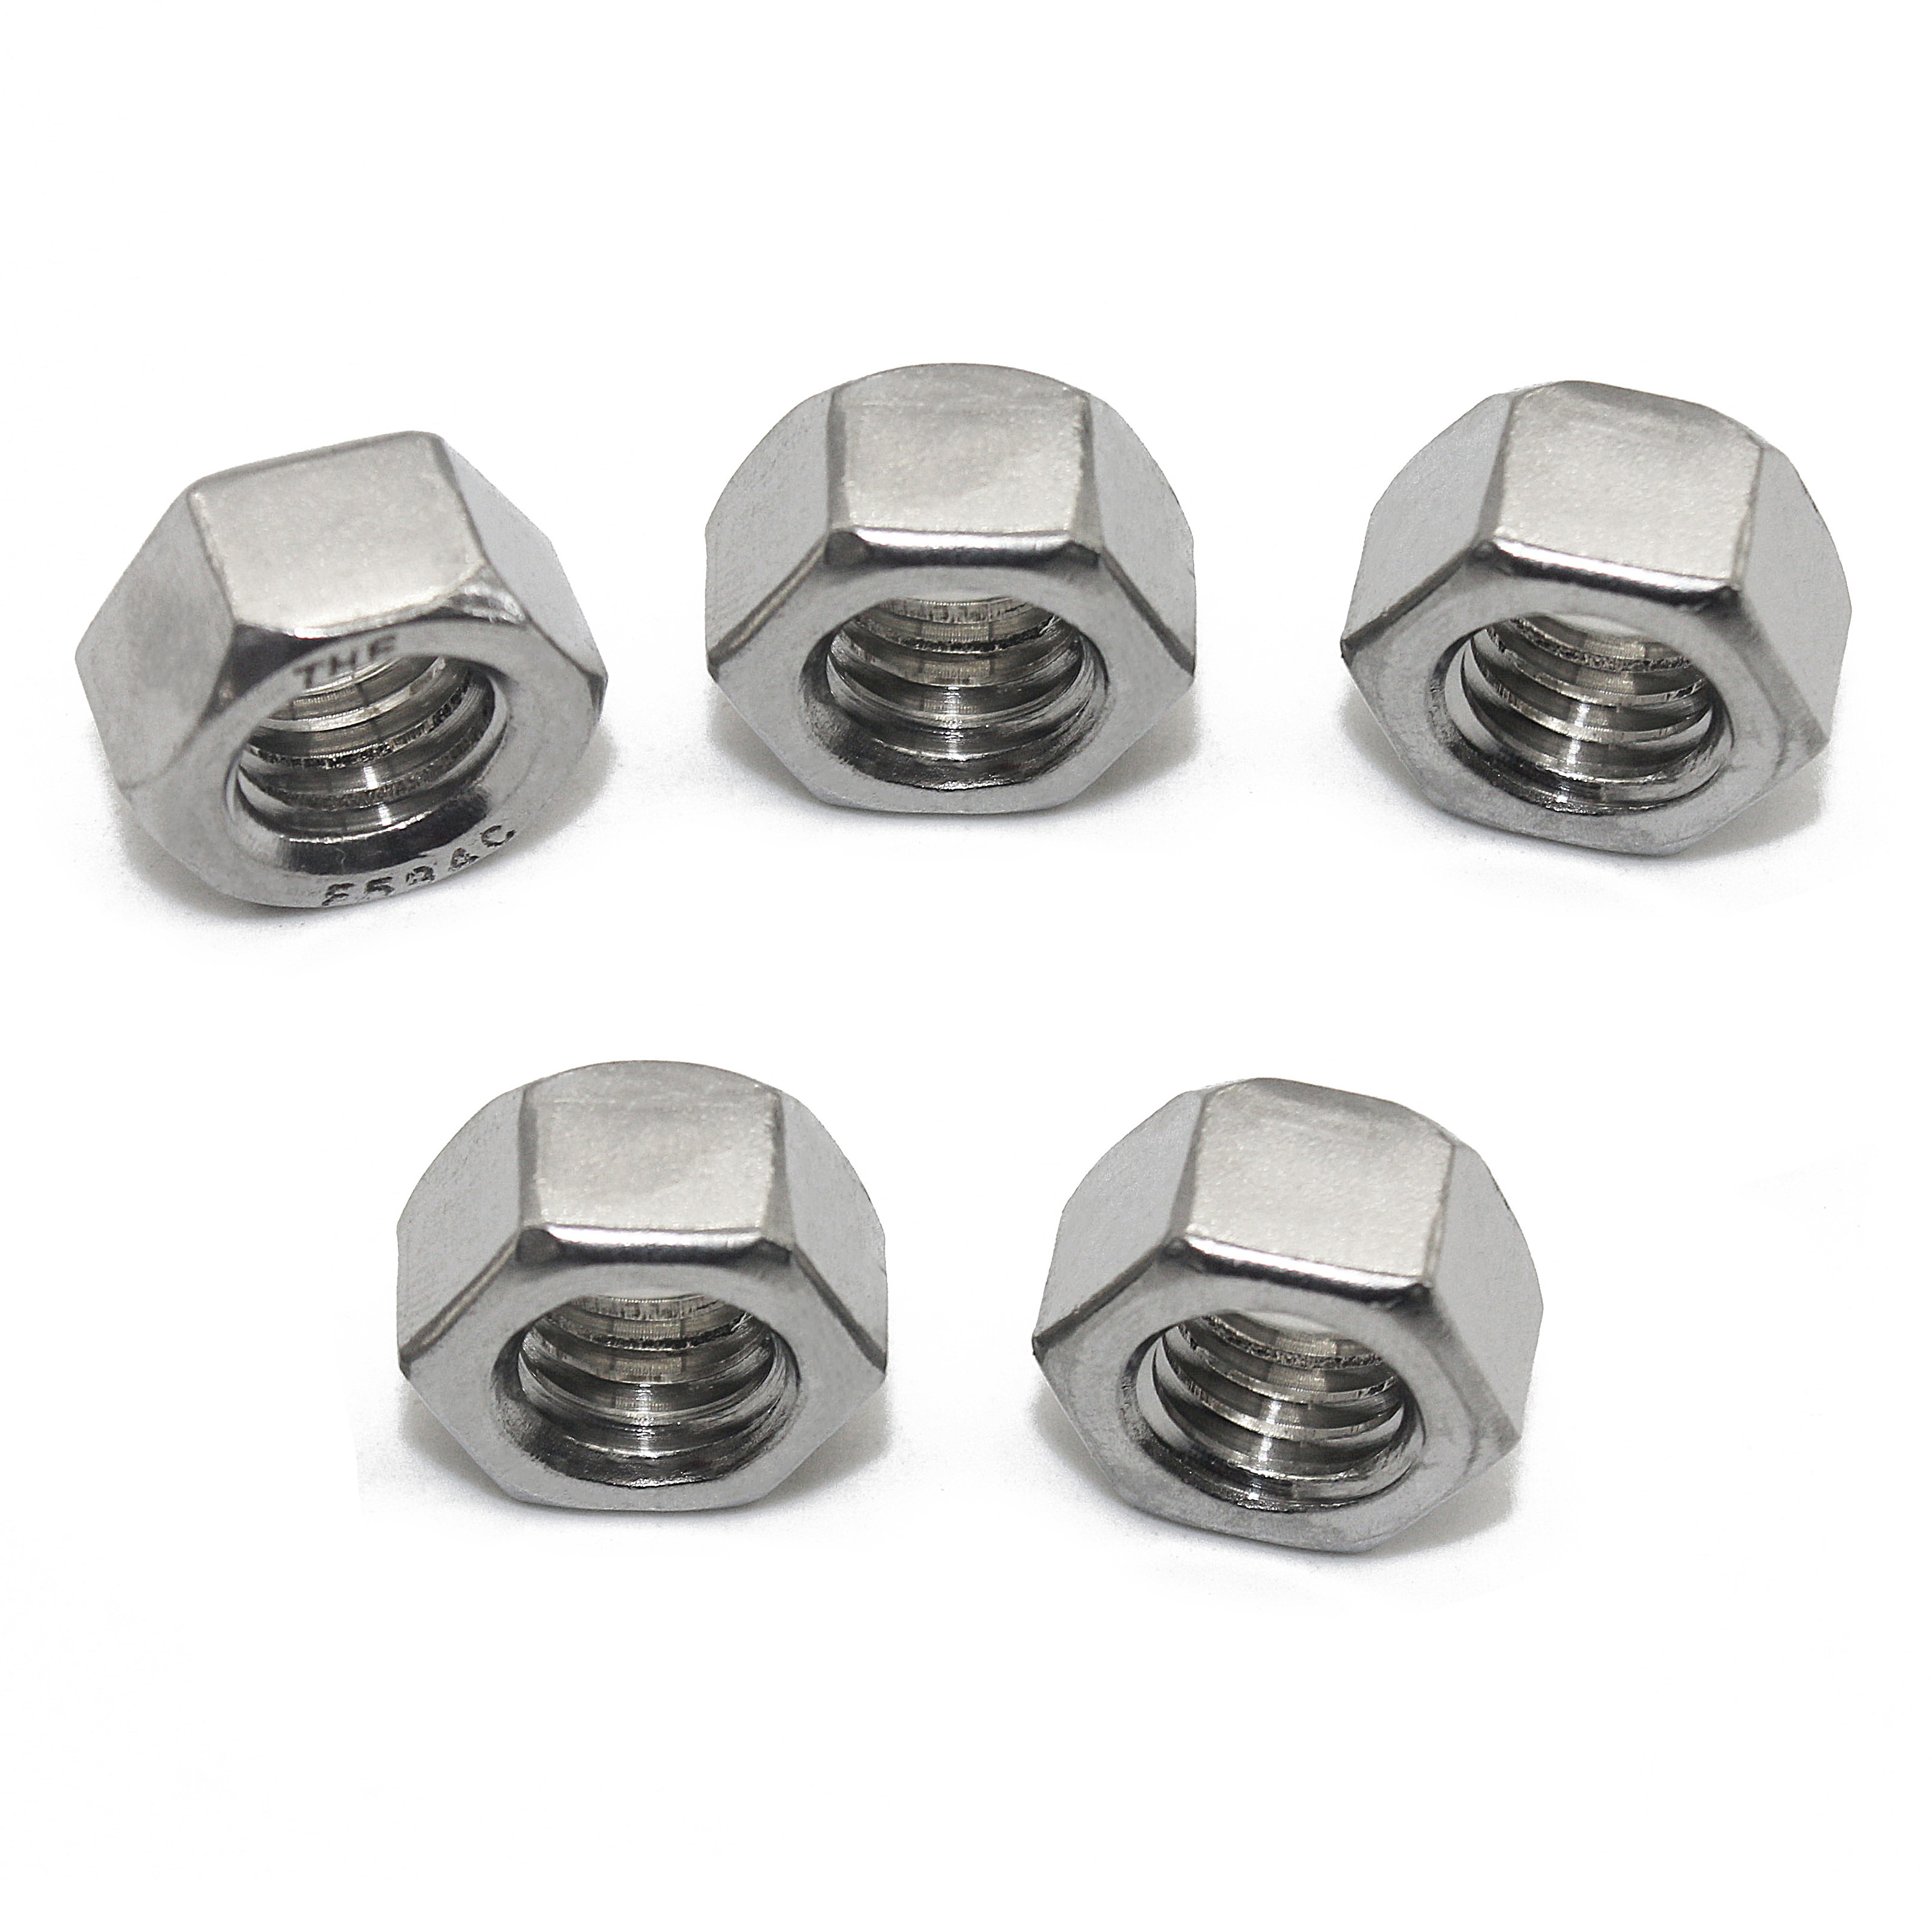 M8 **** Extremely Cheap**** Nuts M12 M10 M6 Hex Head